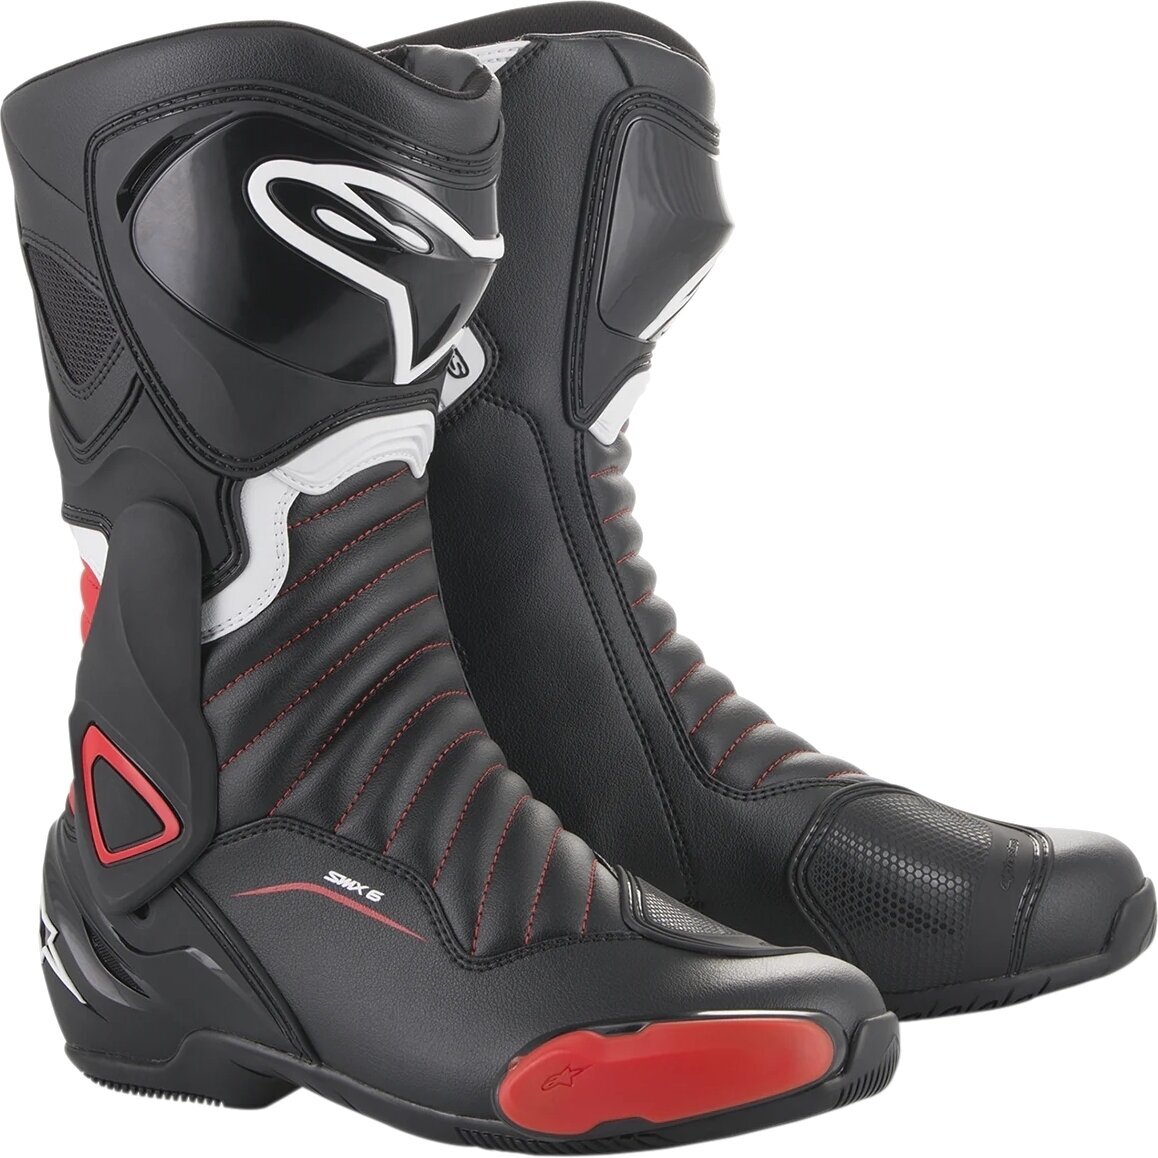 Motorcycle Boots Alpinestars SMX-6 V2 Boots Black/Gray/Red Fluo 38 Motorcycle Boots